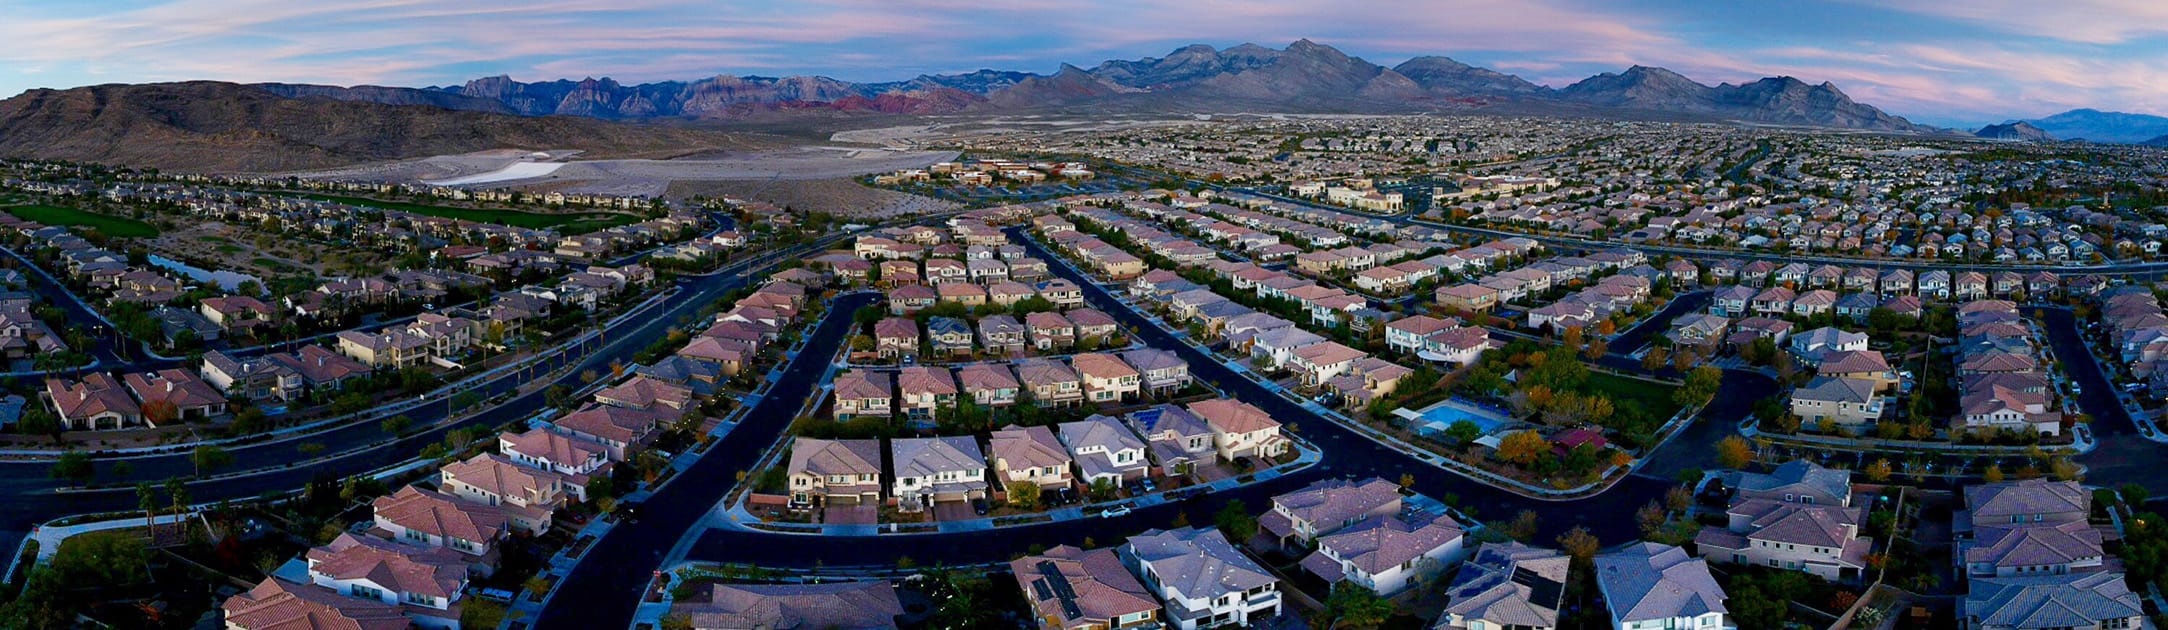 Aerial view of neighborhood at dusk with red rock mountains in the background.